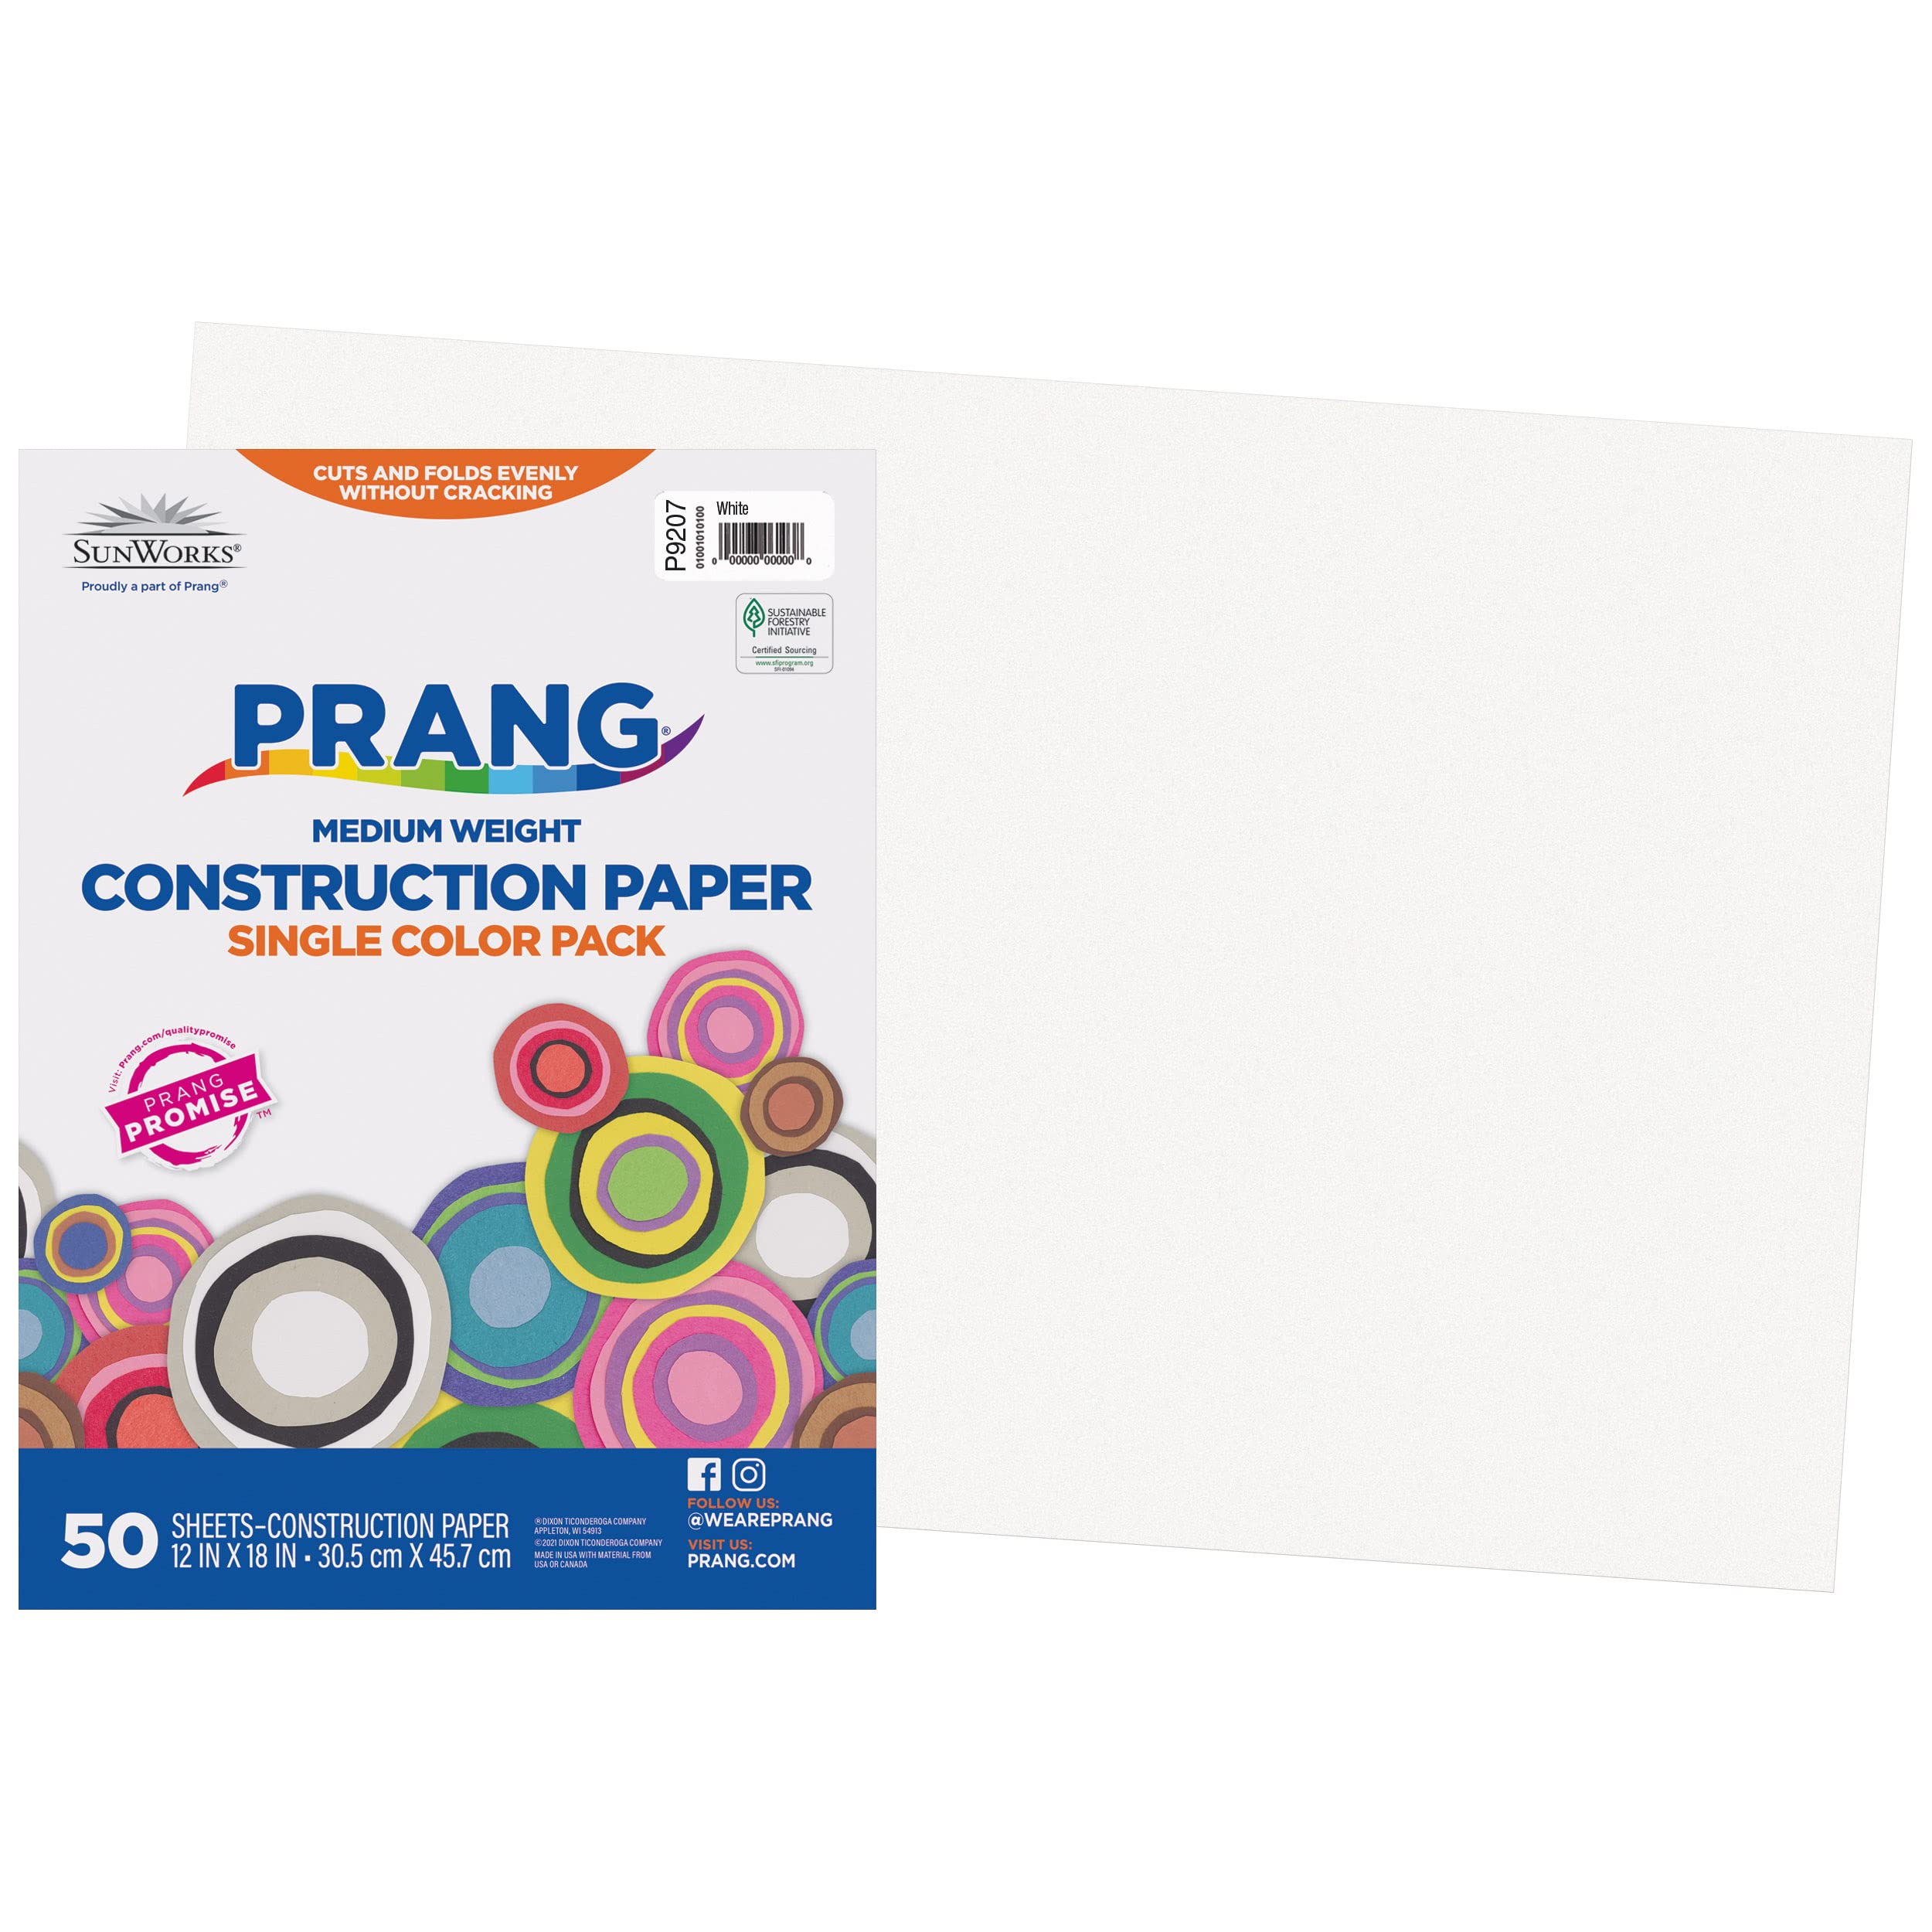  Tru-Ray Extra Large Construction Paper, 24 x 36